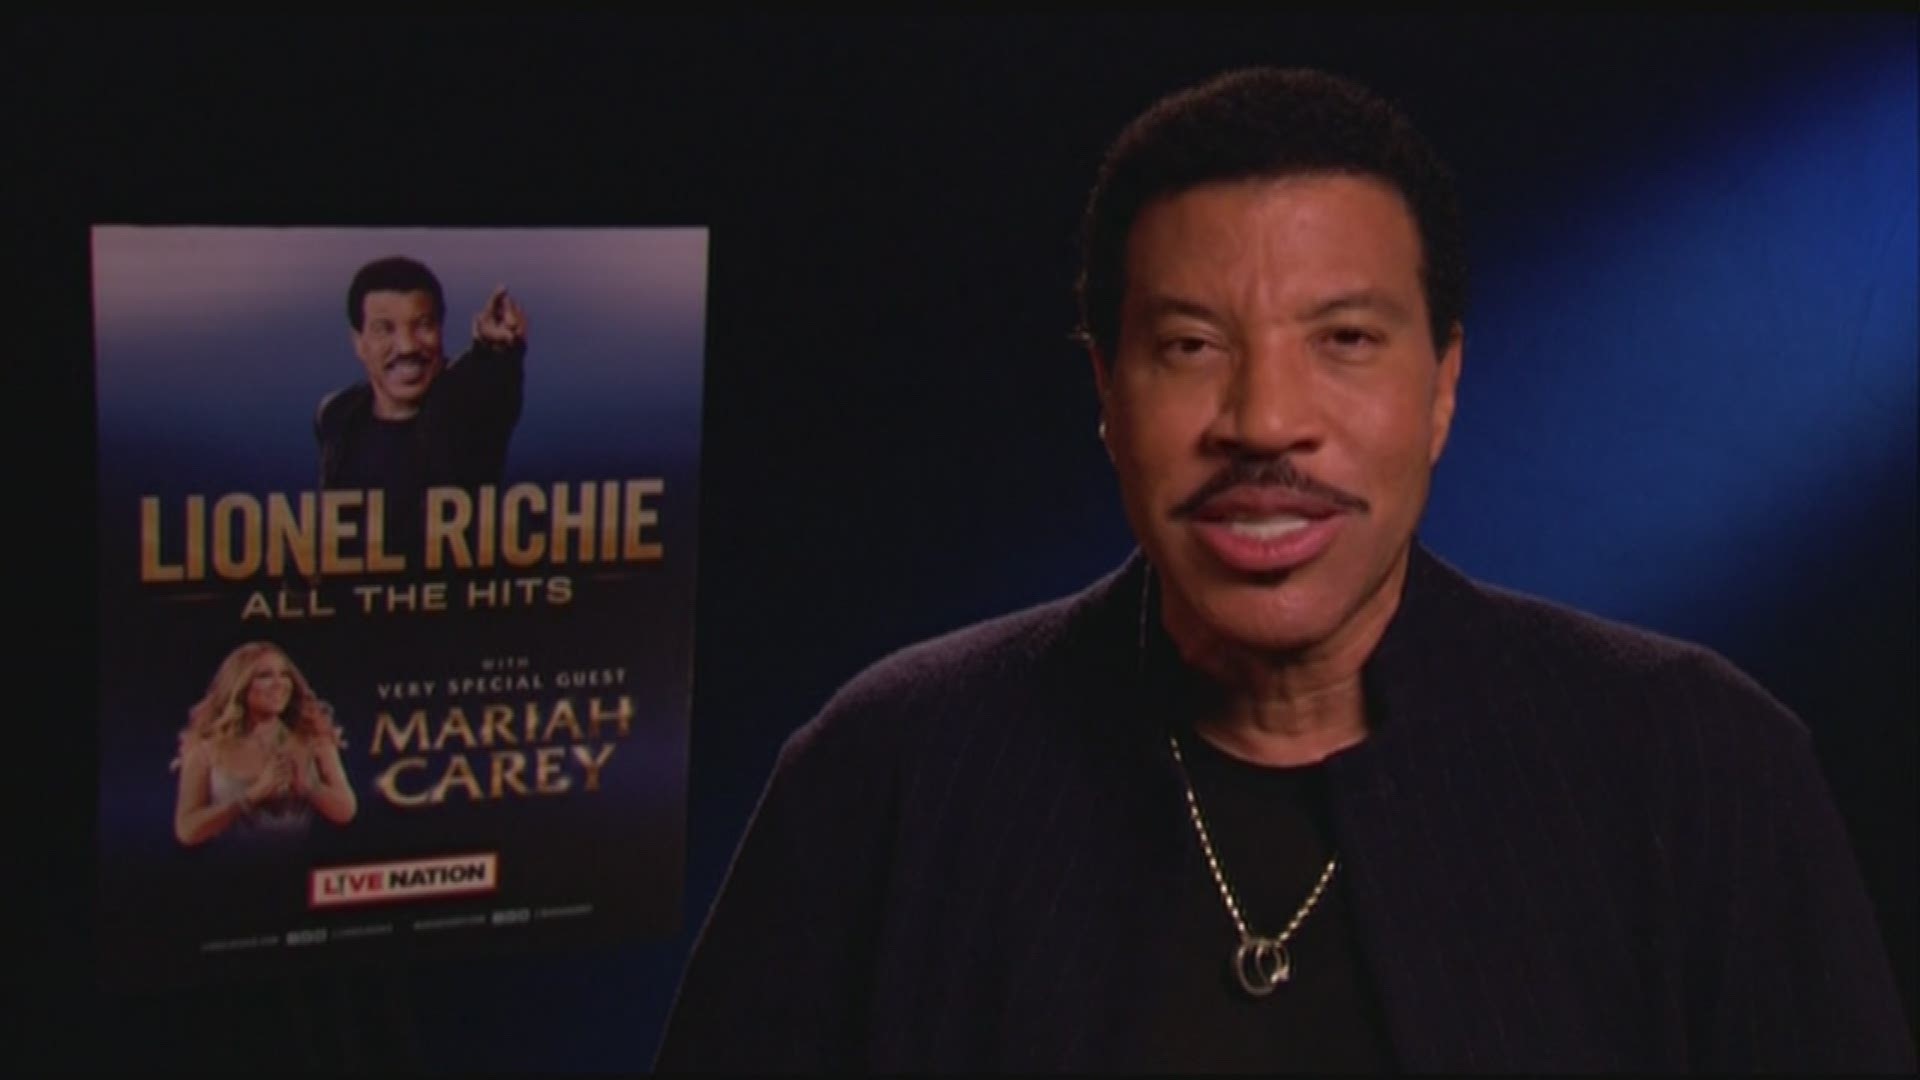 If you love Lionel Richie, you should already have your ticket to his big concert in New Orleans this weekend. The man himself talks to us about his tour and all the hits he will perform.